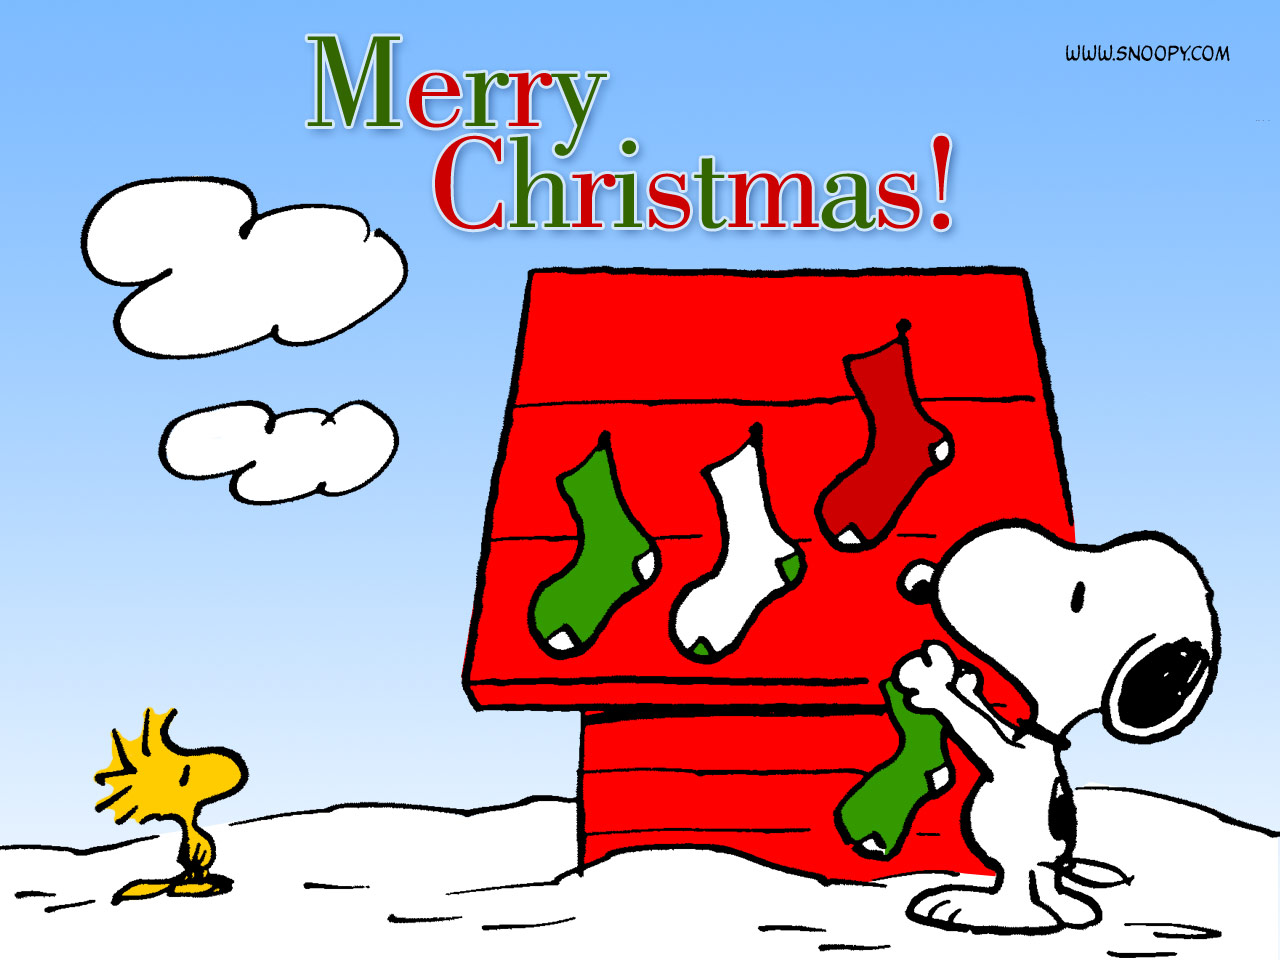 Christian wallpaper Merry Christmas from Snoopy.